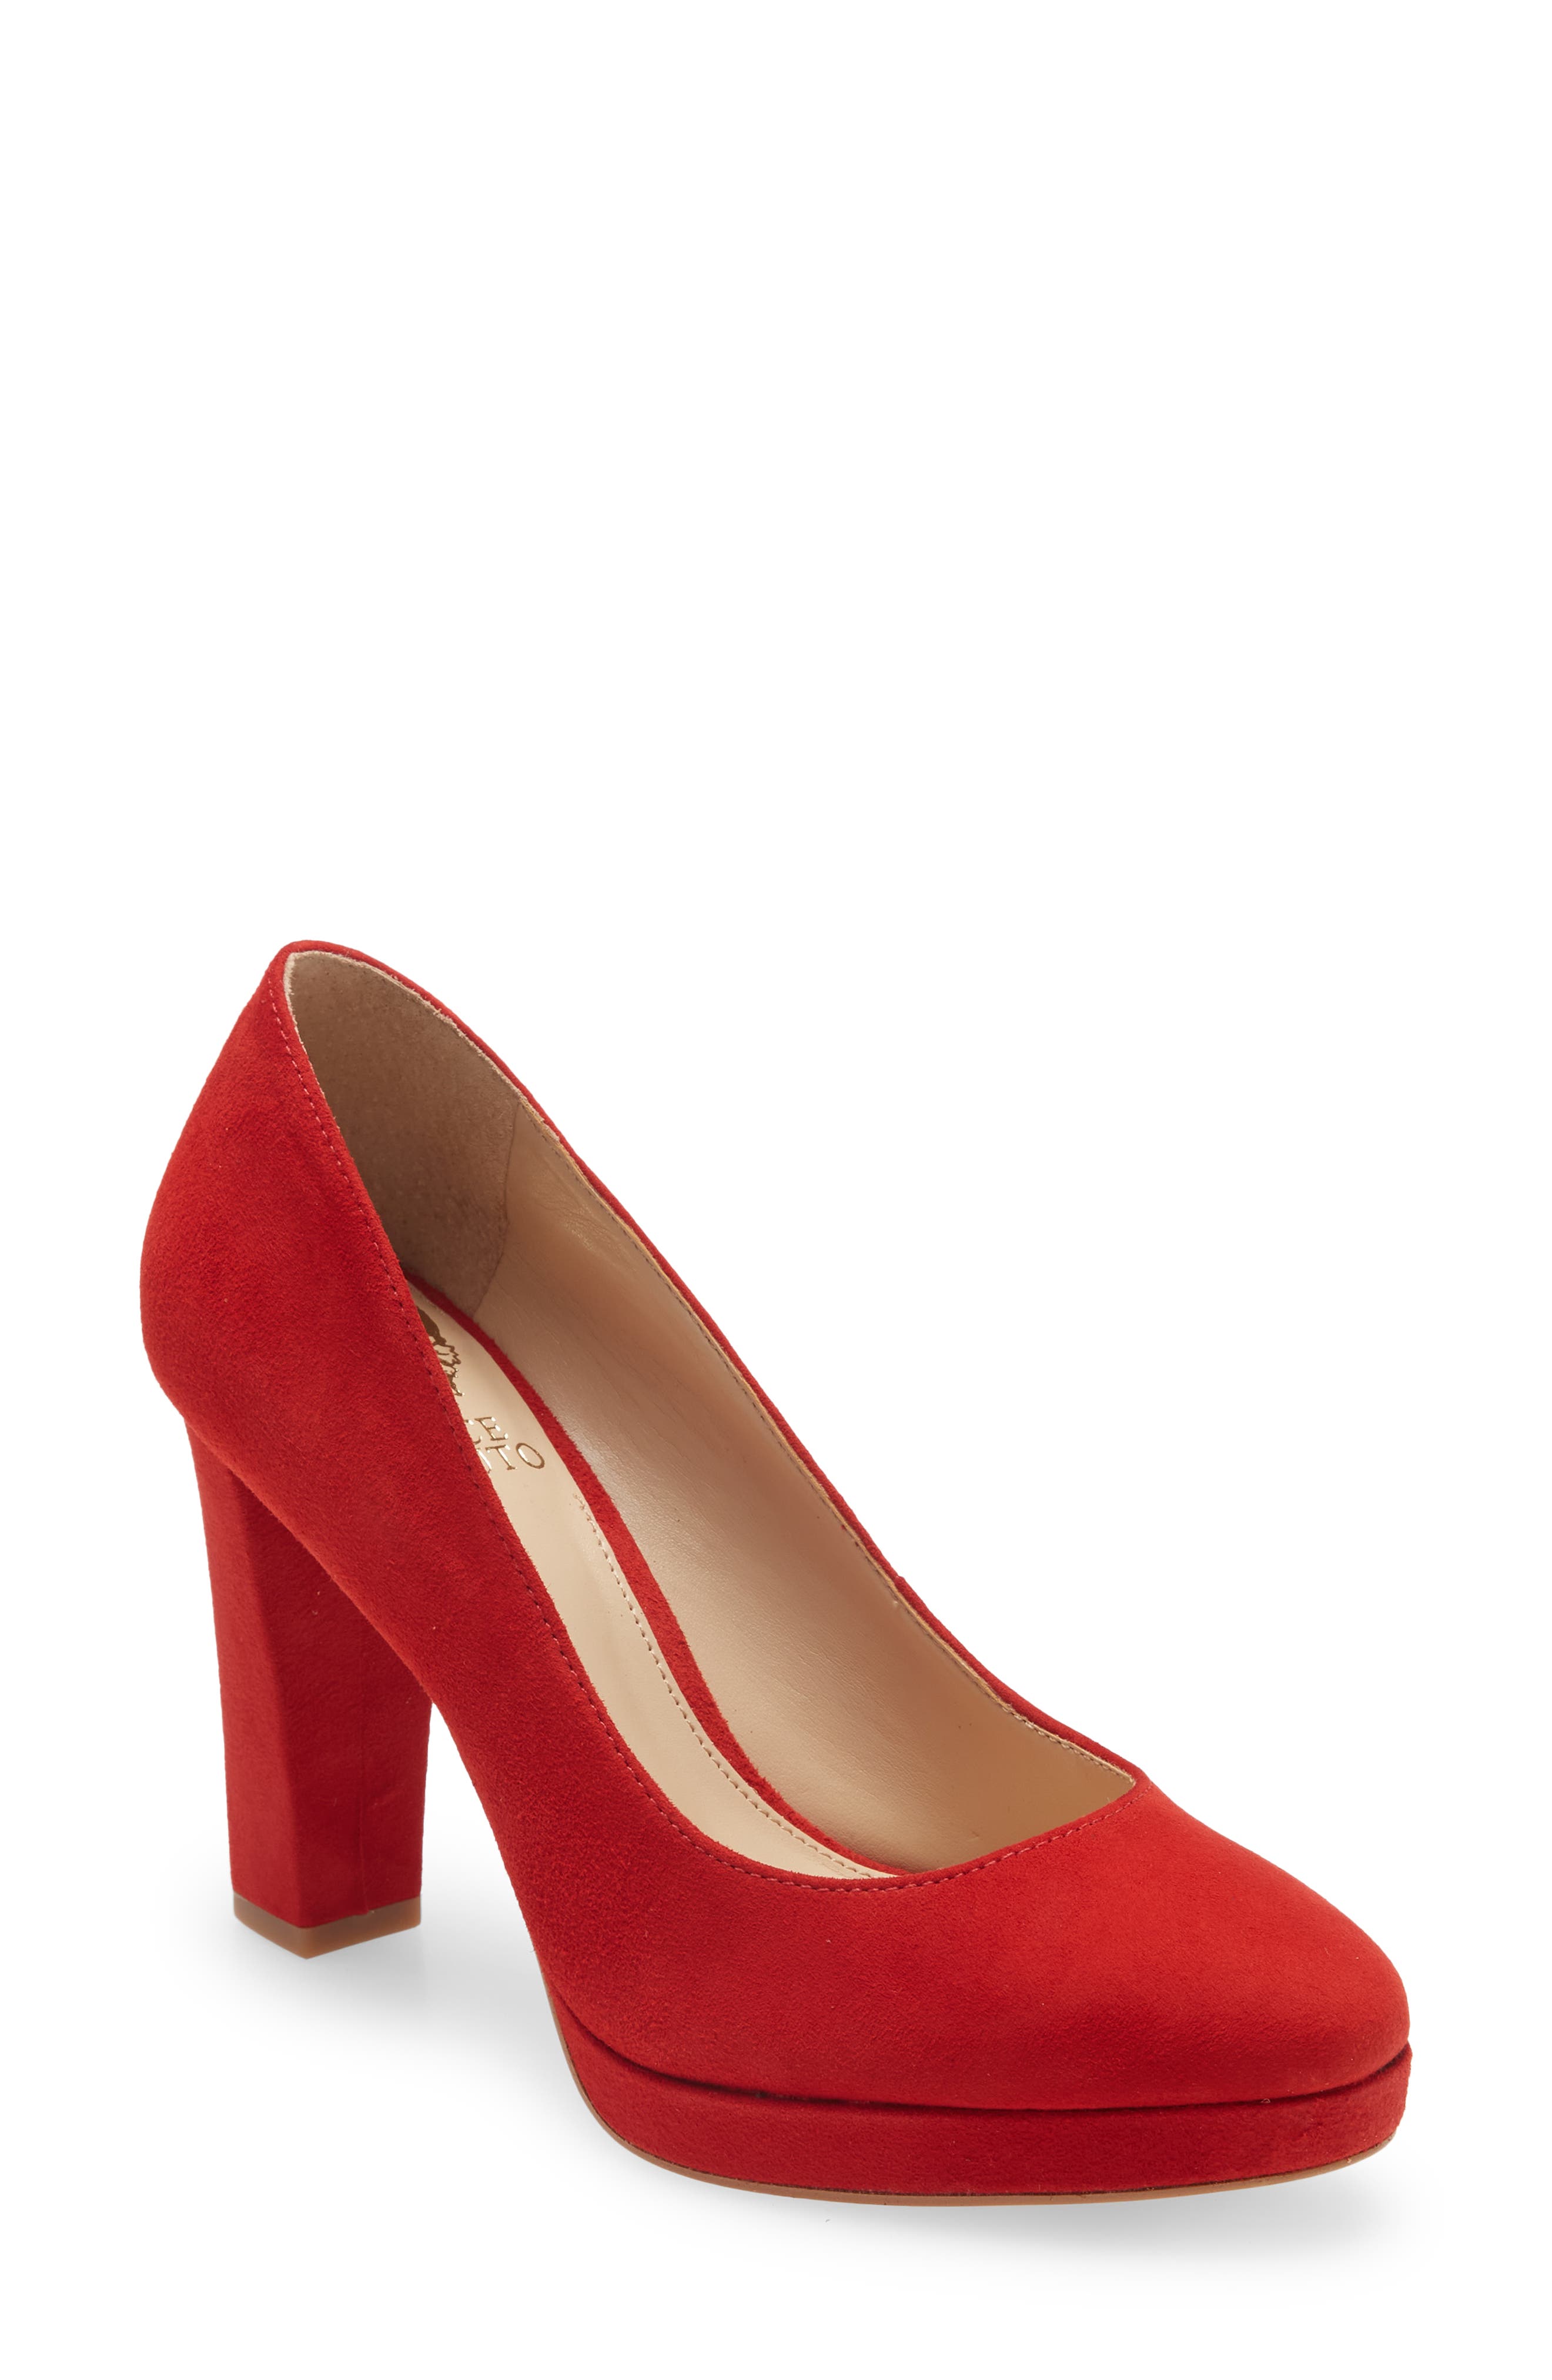 UPC 191707345850 product image for Vince Camuto Halria Pump in Cherry Berry True Suede at Nordstrom, Size 11 | upcitemdb.com